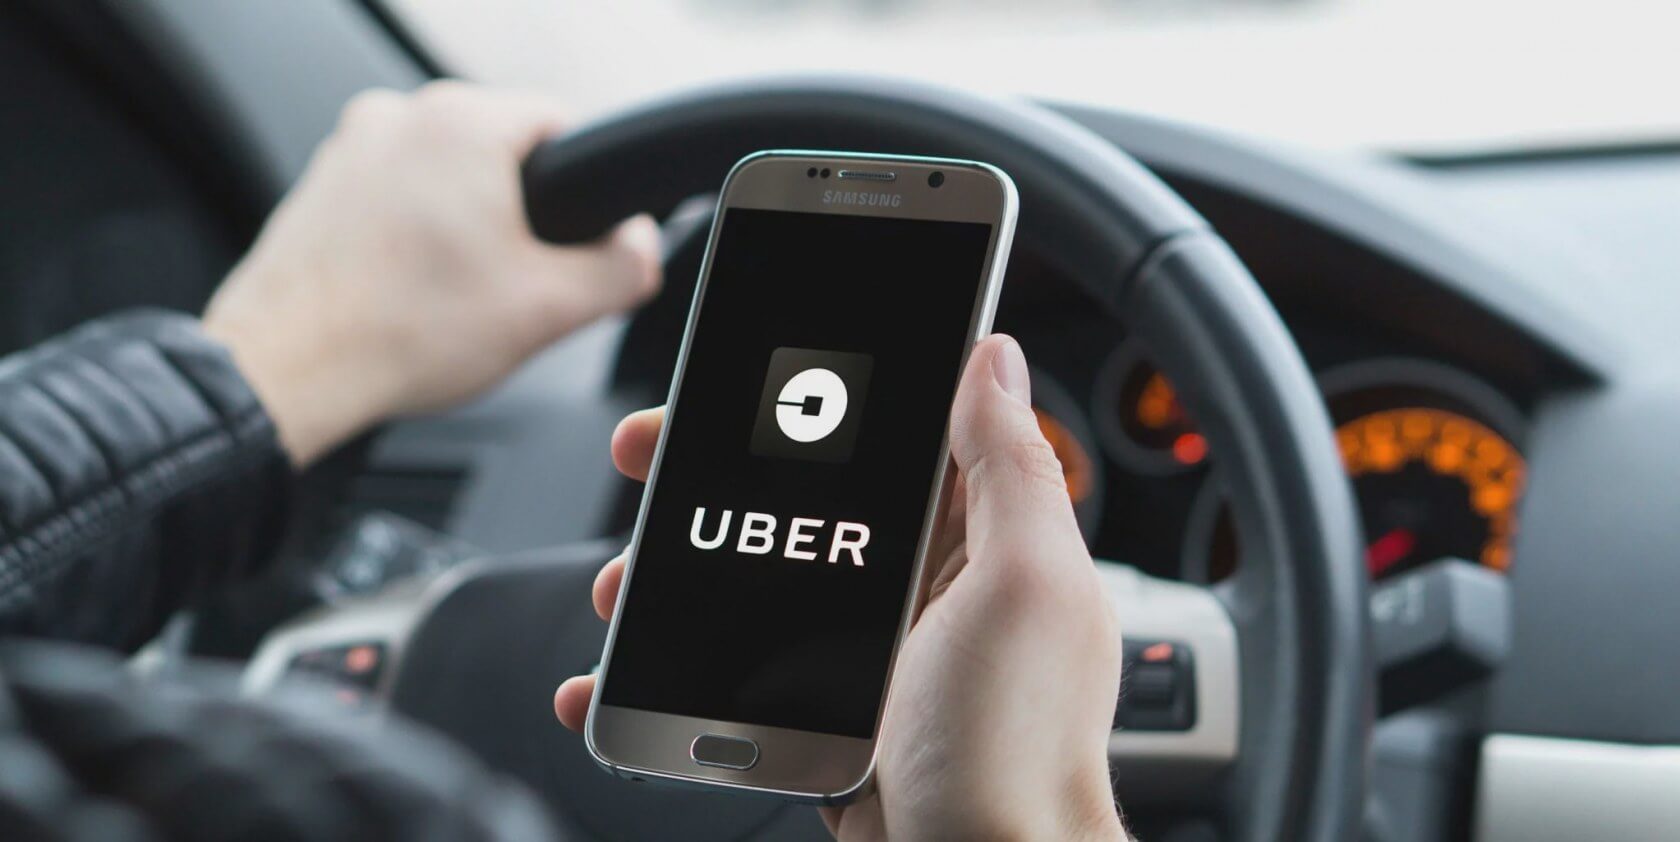 Showtime is producing a TV series about Uber